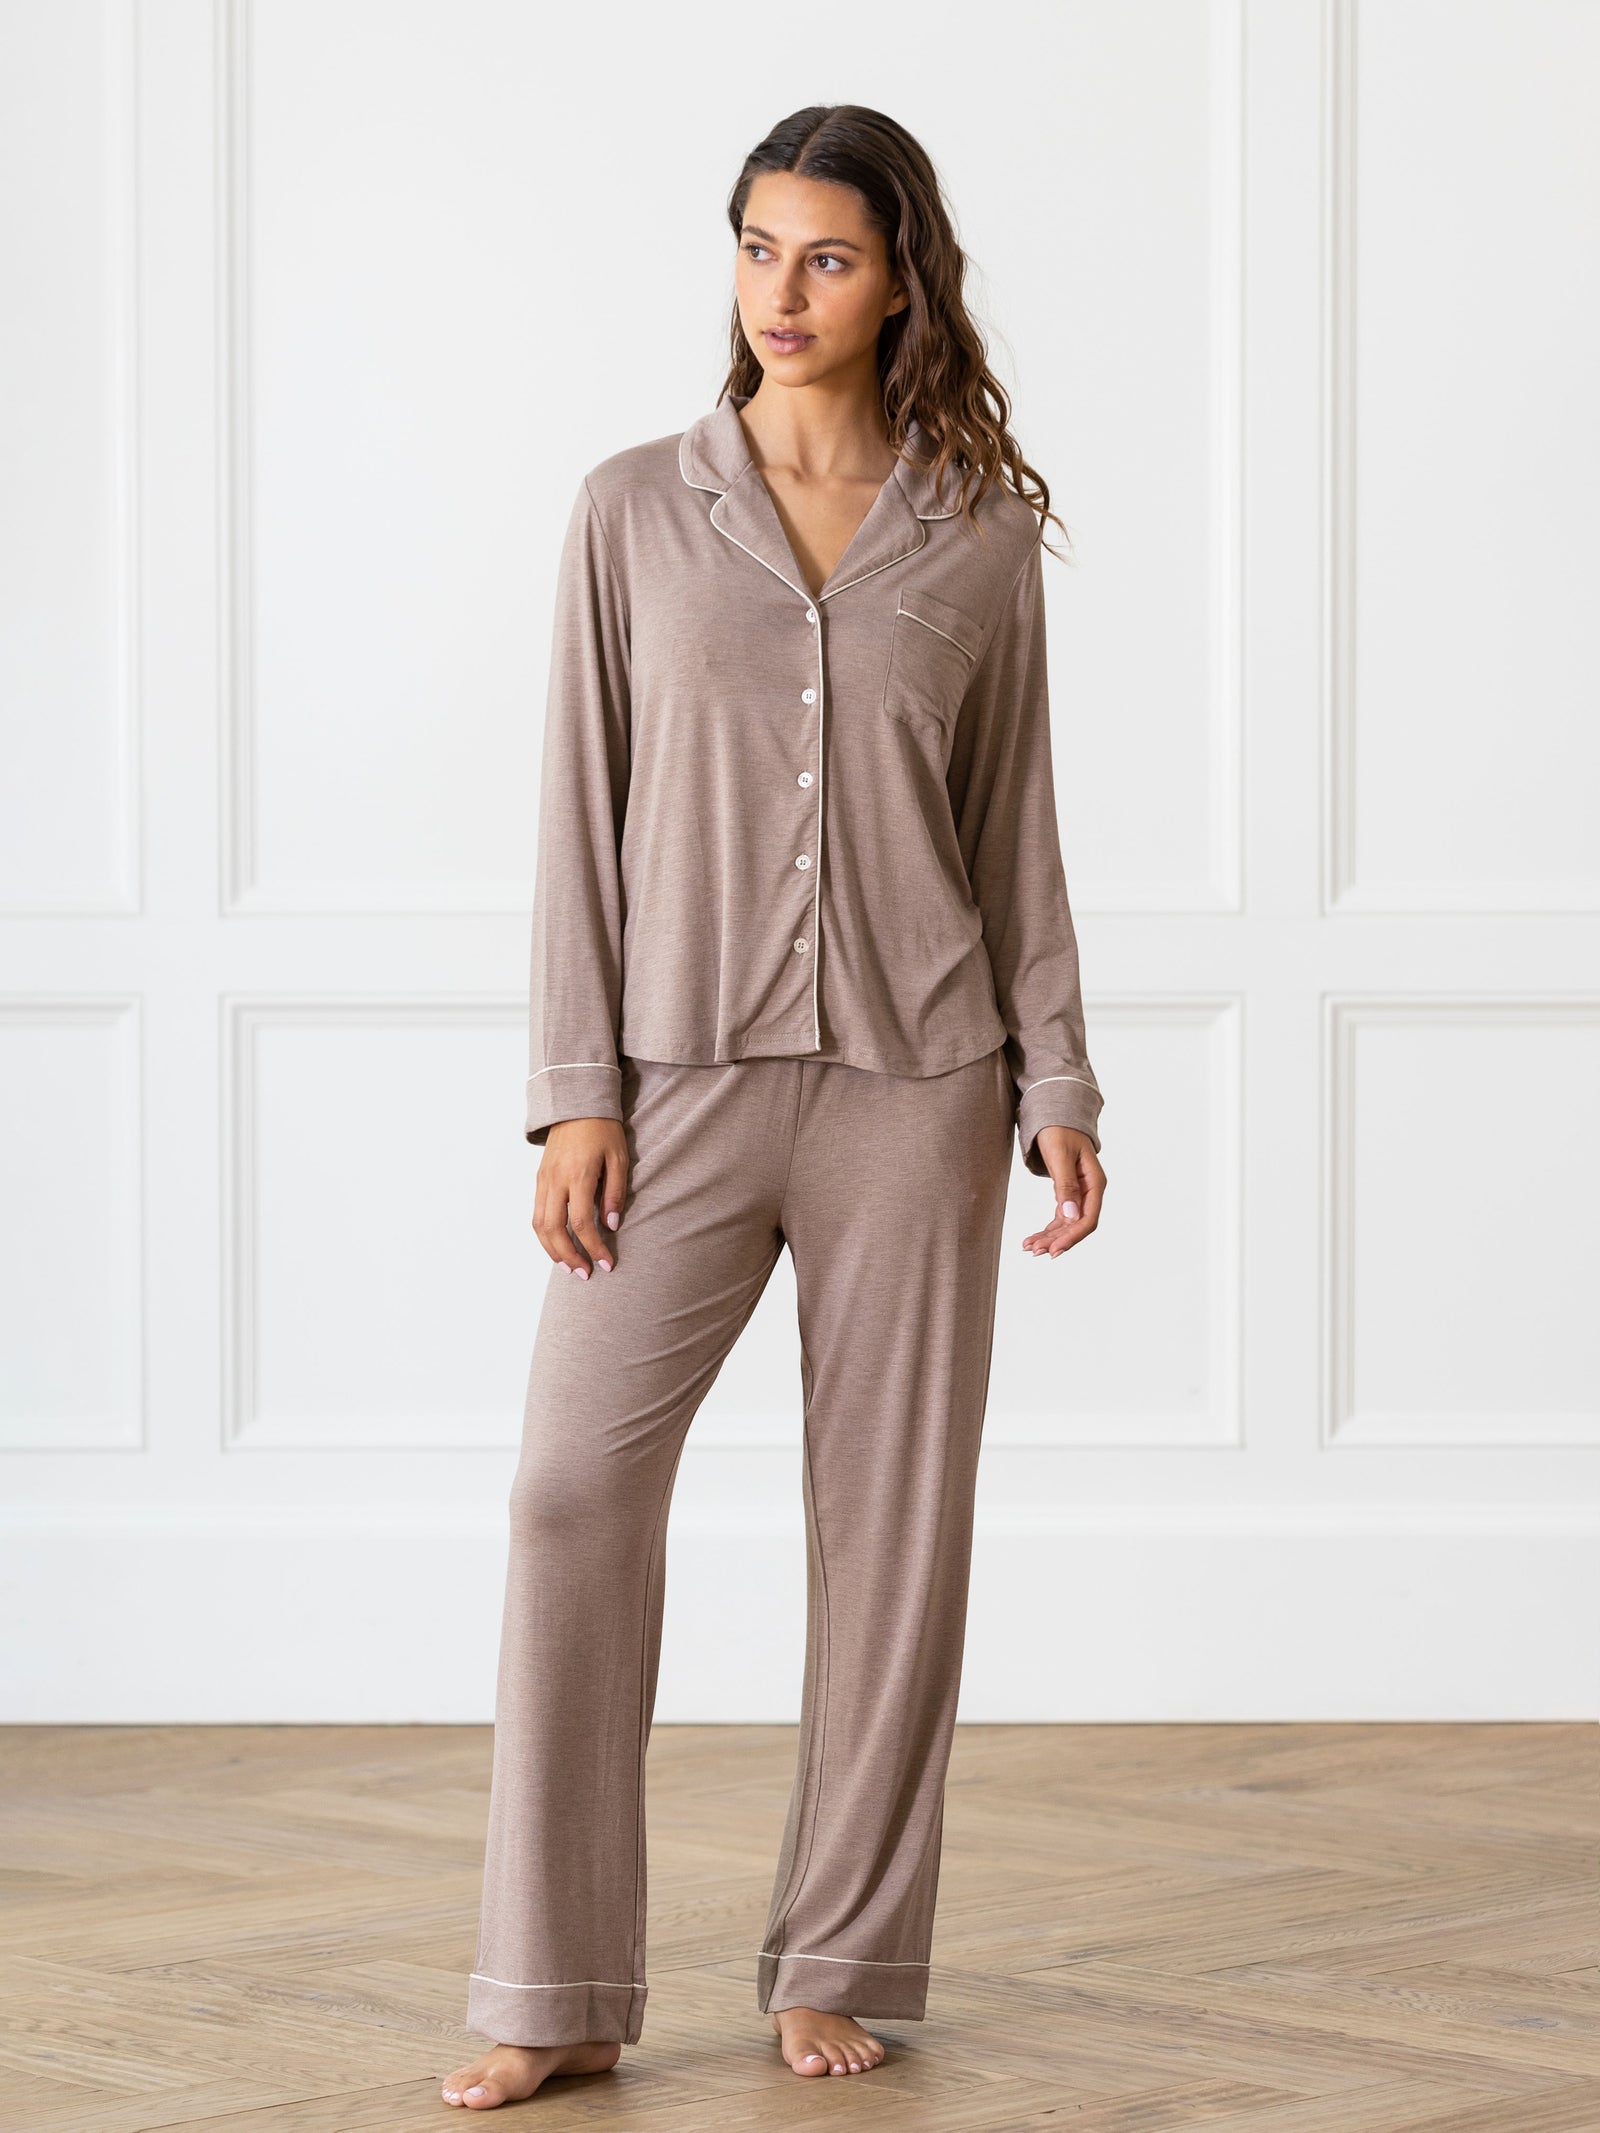 Walnut Long Sleeve Pajama Set modeled by a woman. The photo was taken in a light setting, showing off the colors and lines of the pajamas. 